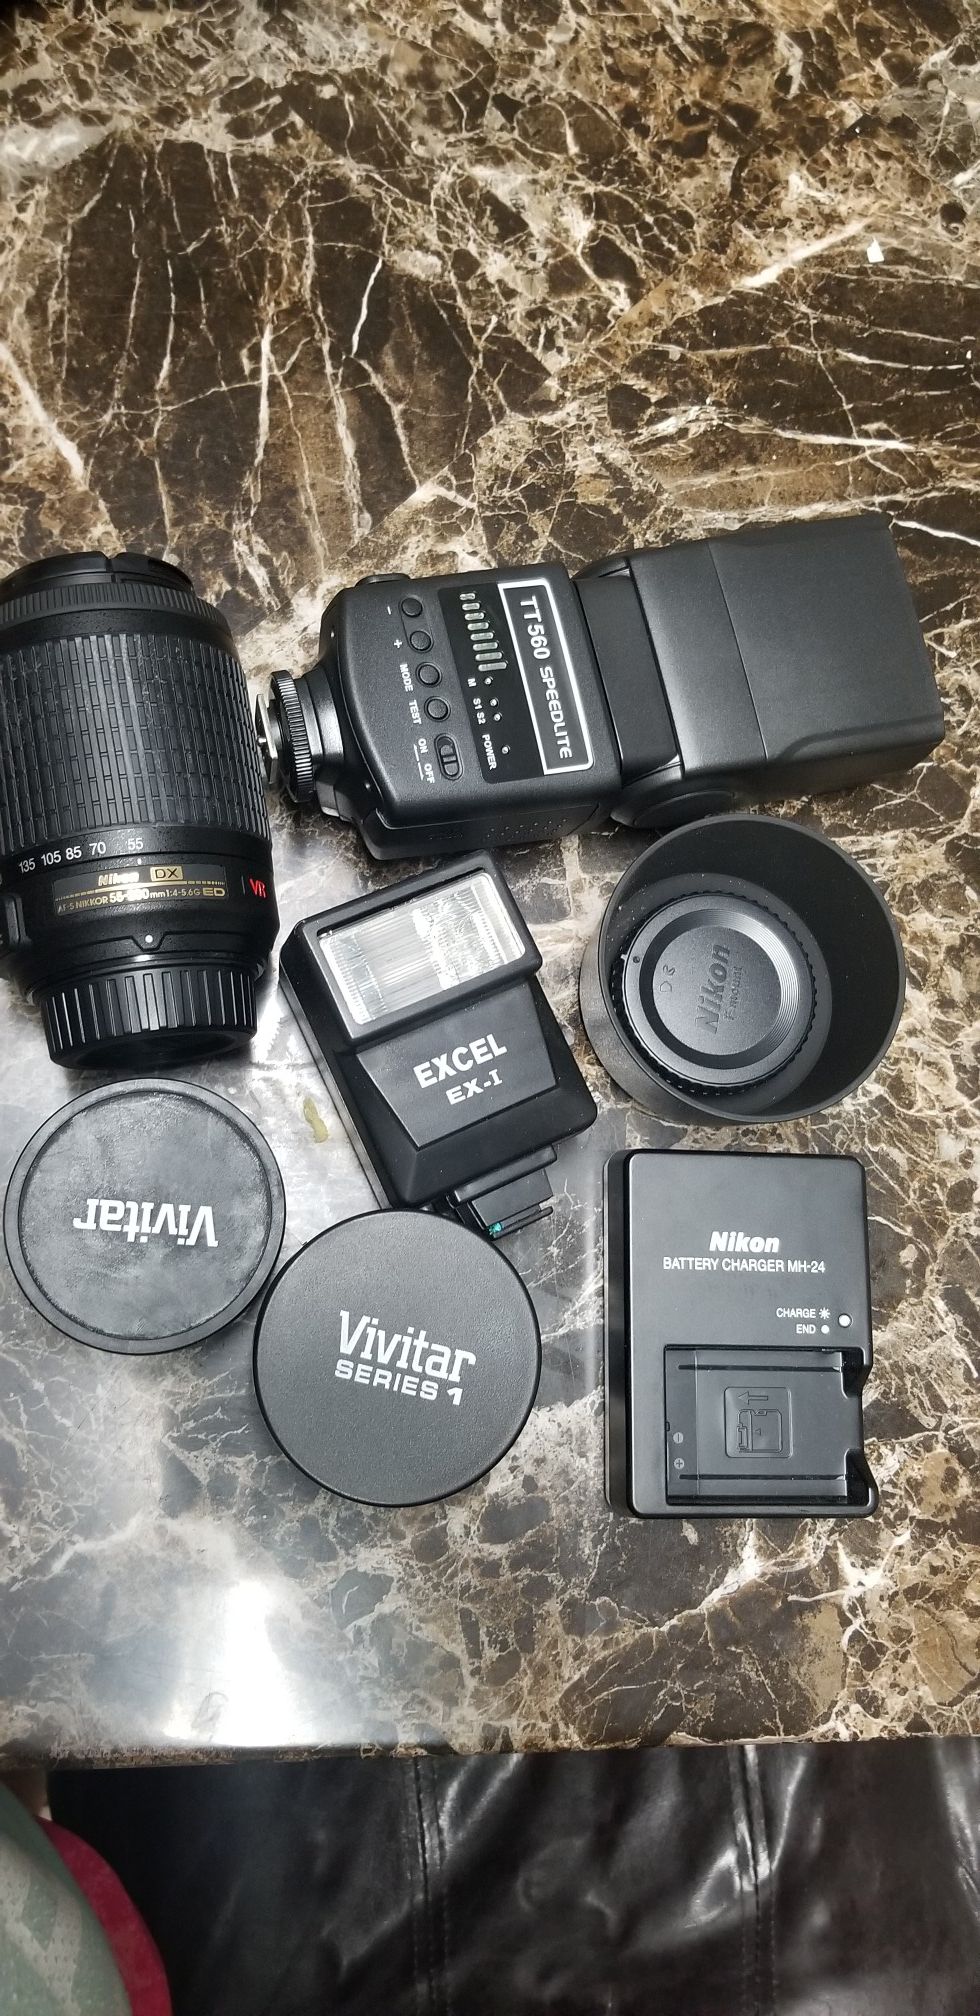 Nikon lenses and accessories